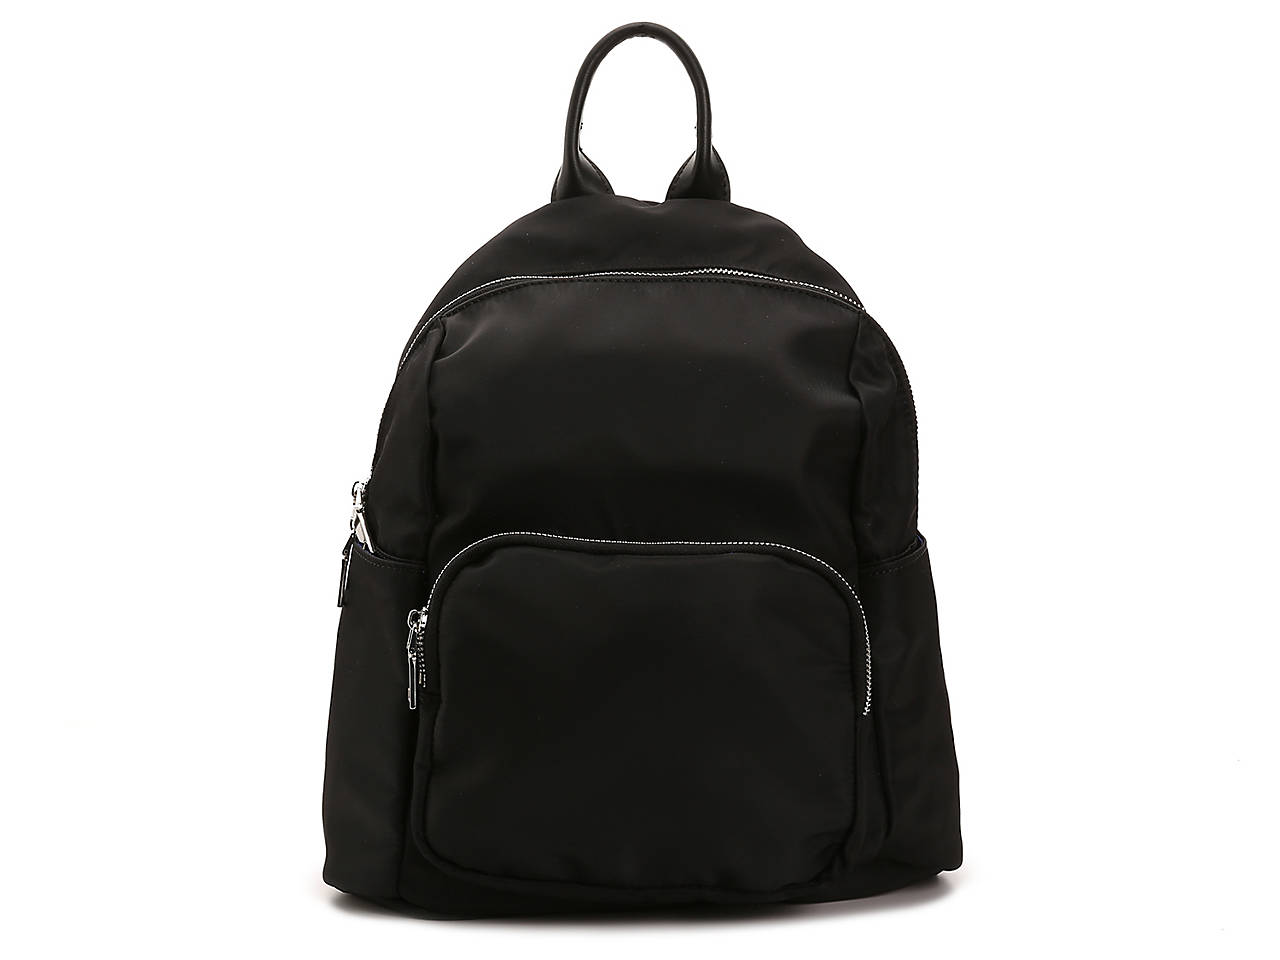 Urban Expressions Shadow Backpack Women's Handbags & Accessories | DSW